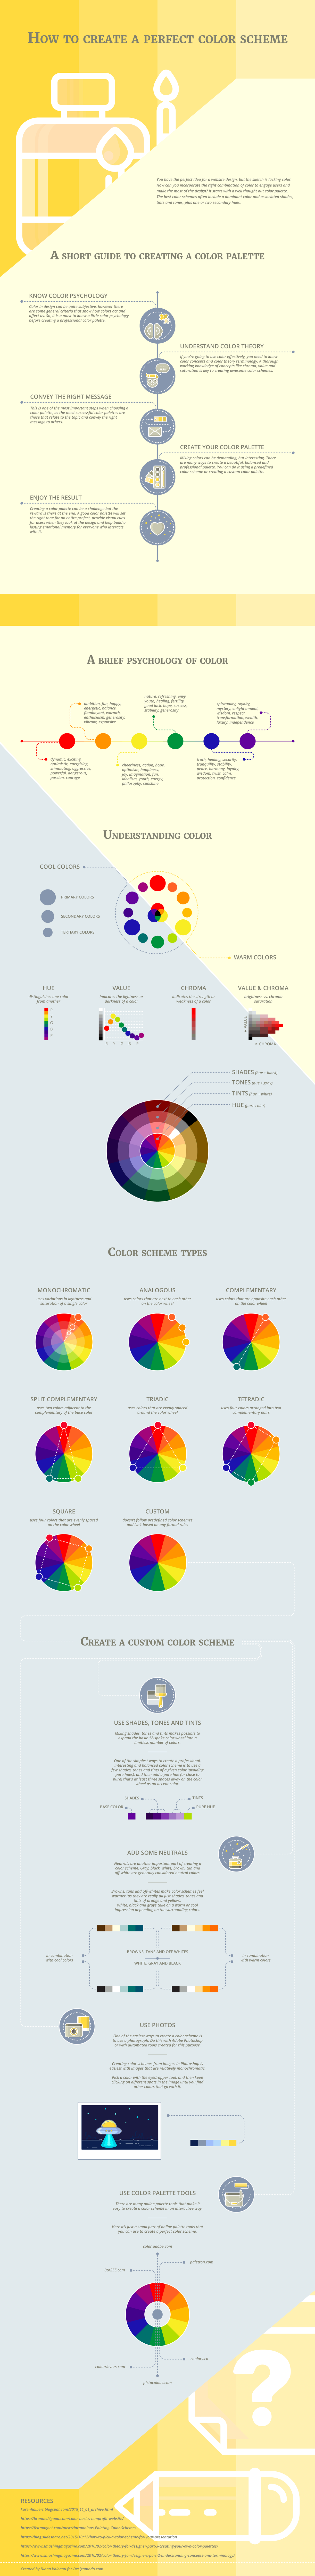 How to Create a Perfect Color Scheme